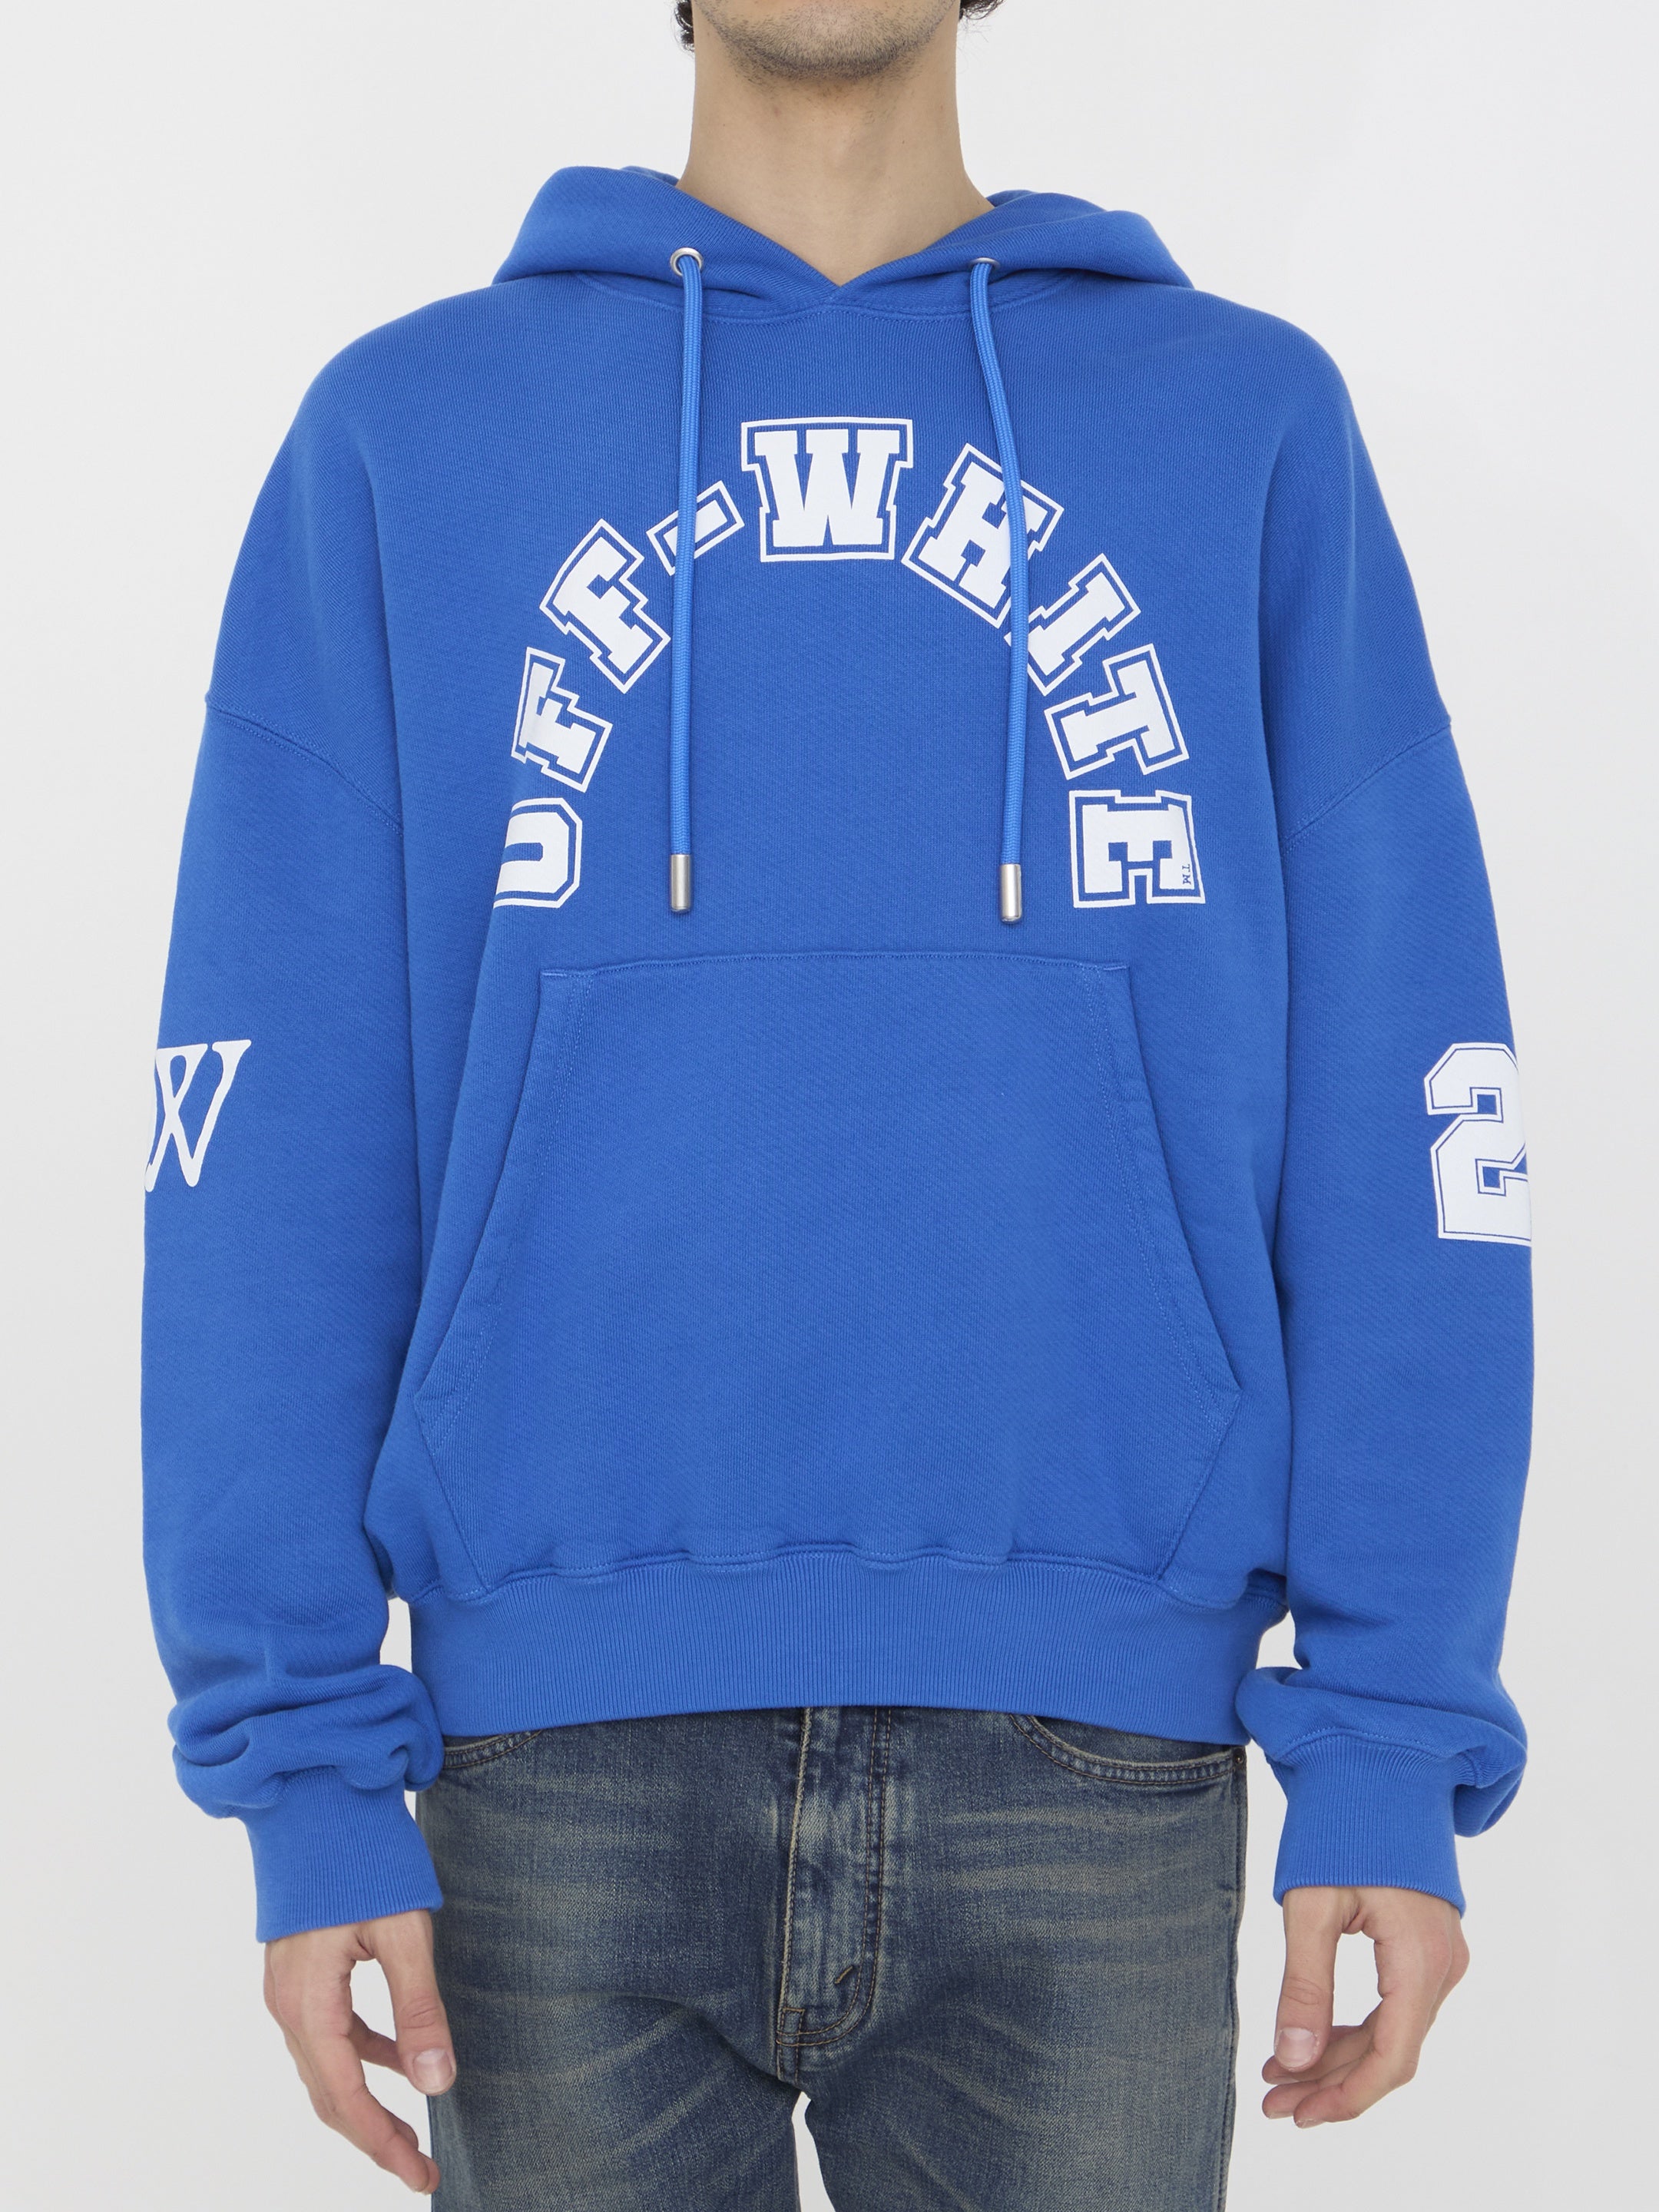 OFF-WHITE-OUTLET-SALE-Football-Over-hoodie-Strick-S-BLUE-ARCHIVE-COLLECTION.jpg